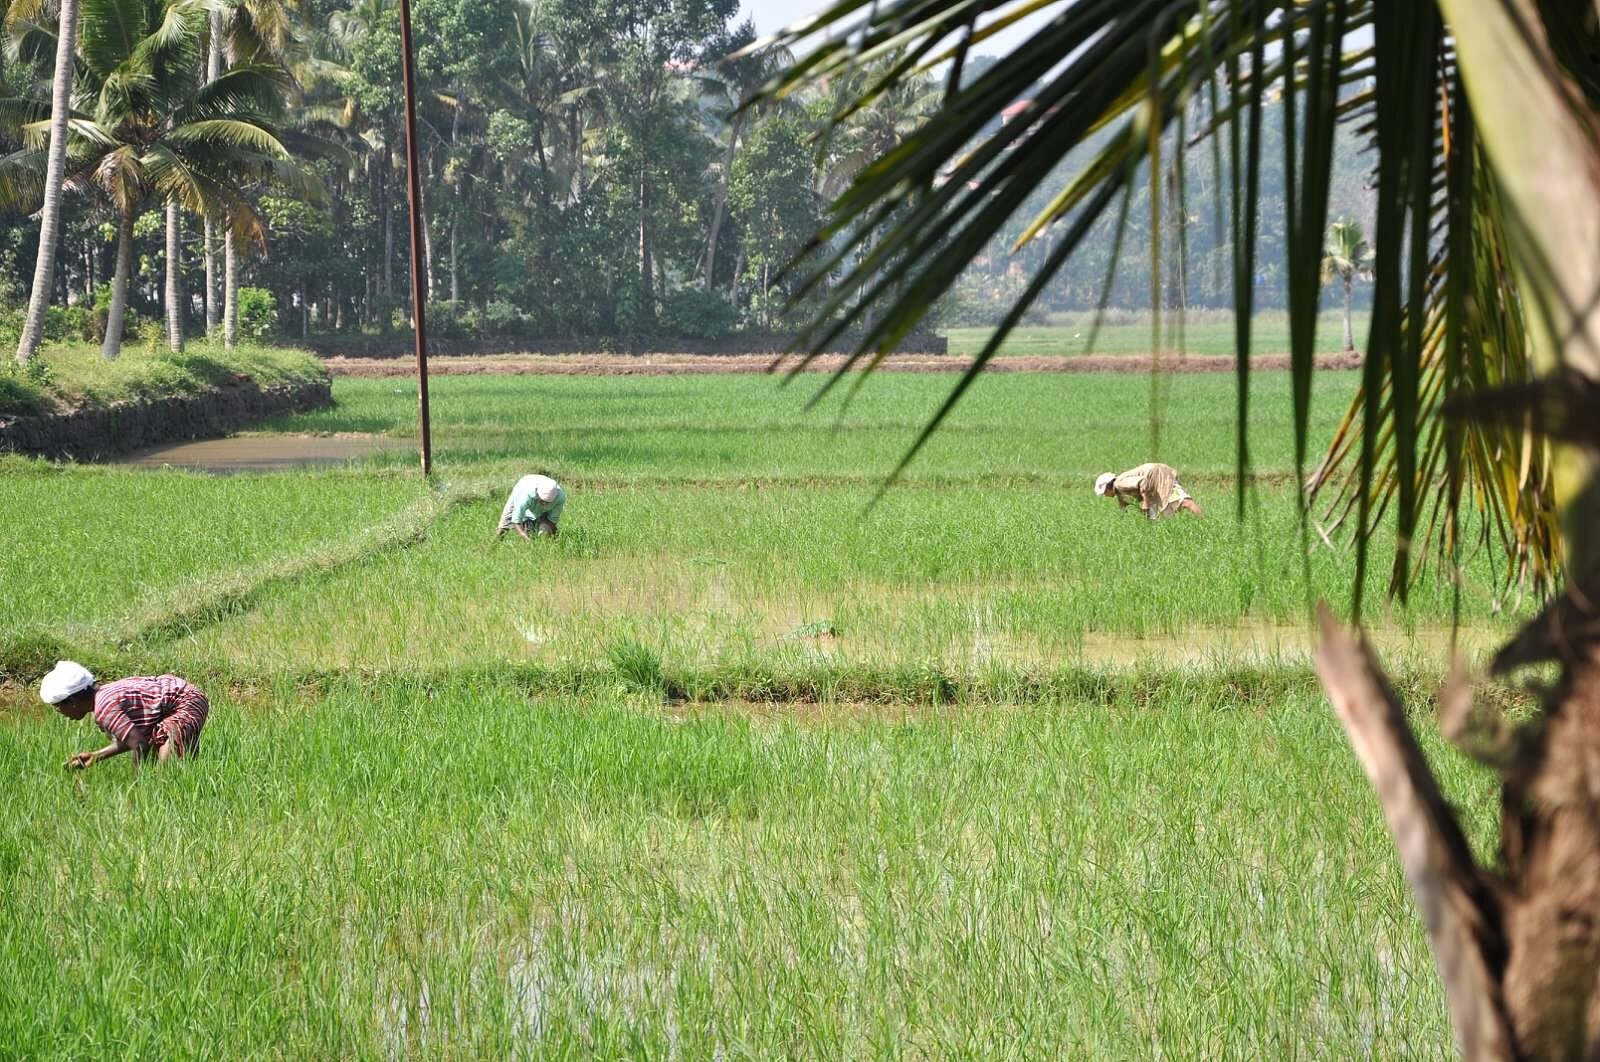 Working in the fields of India